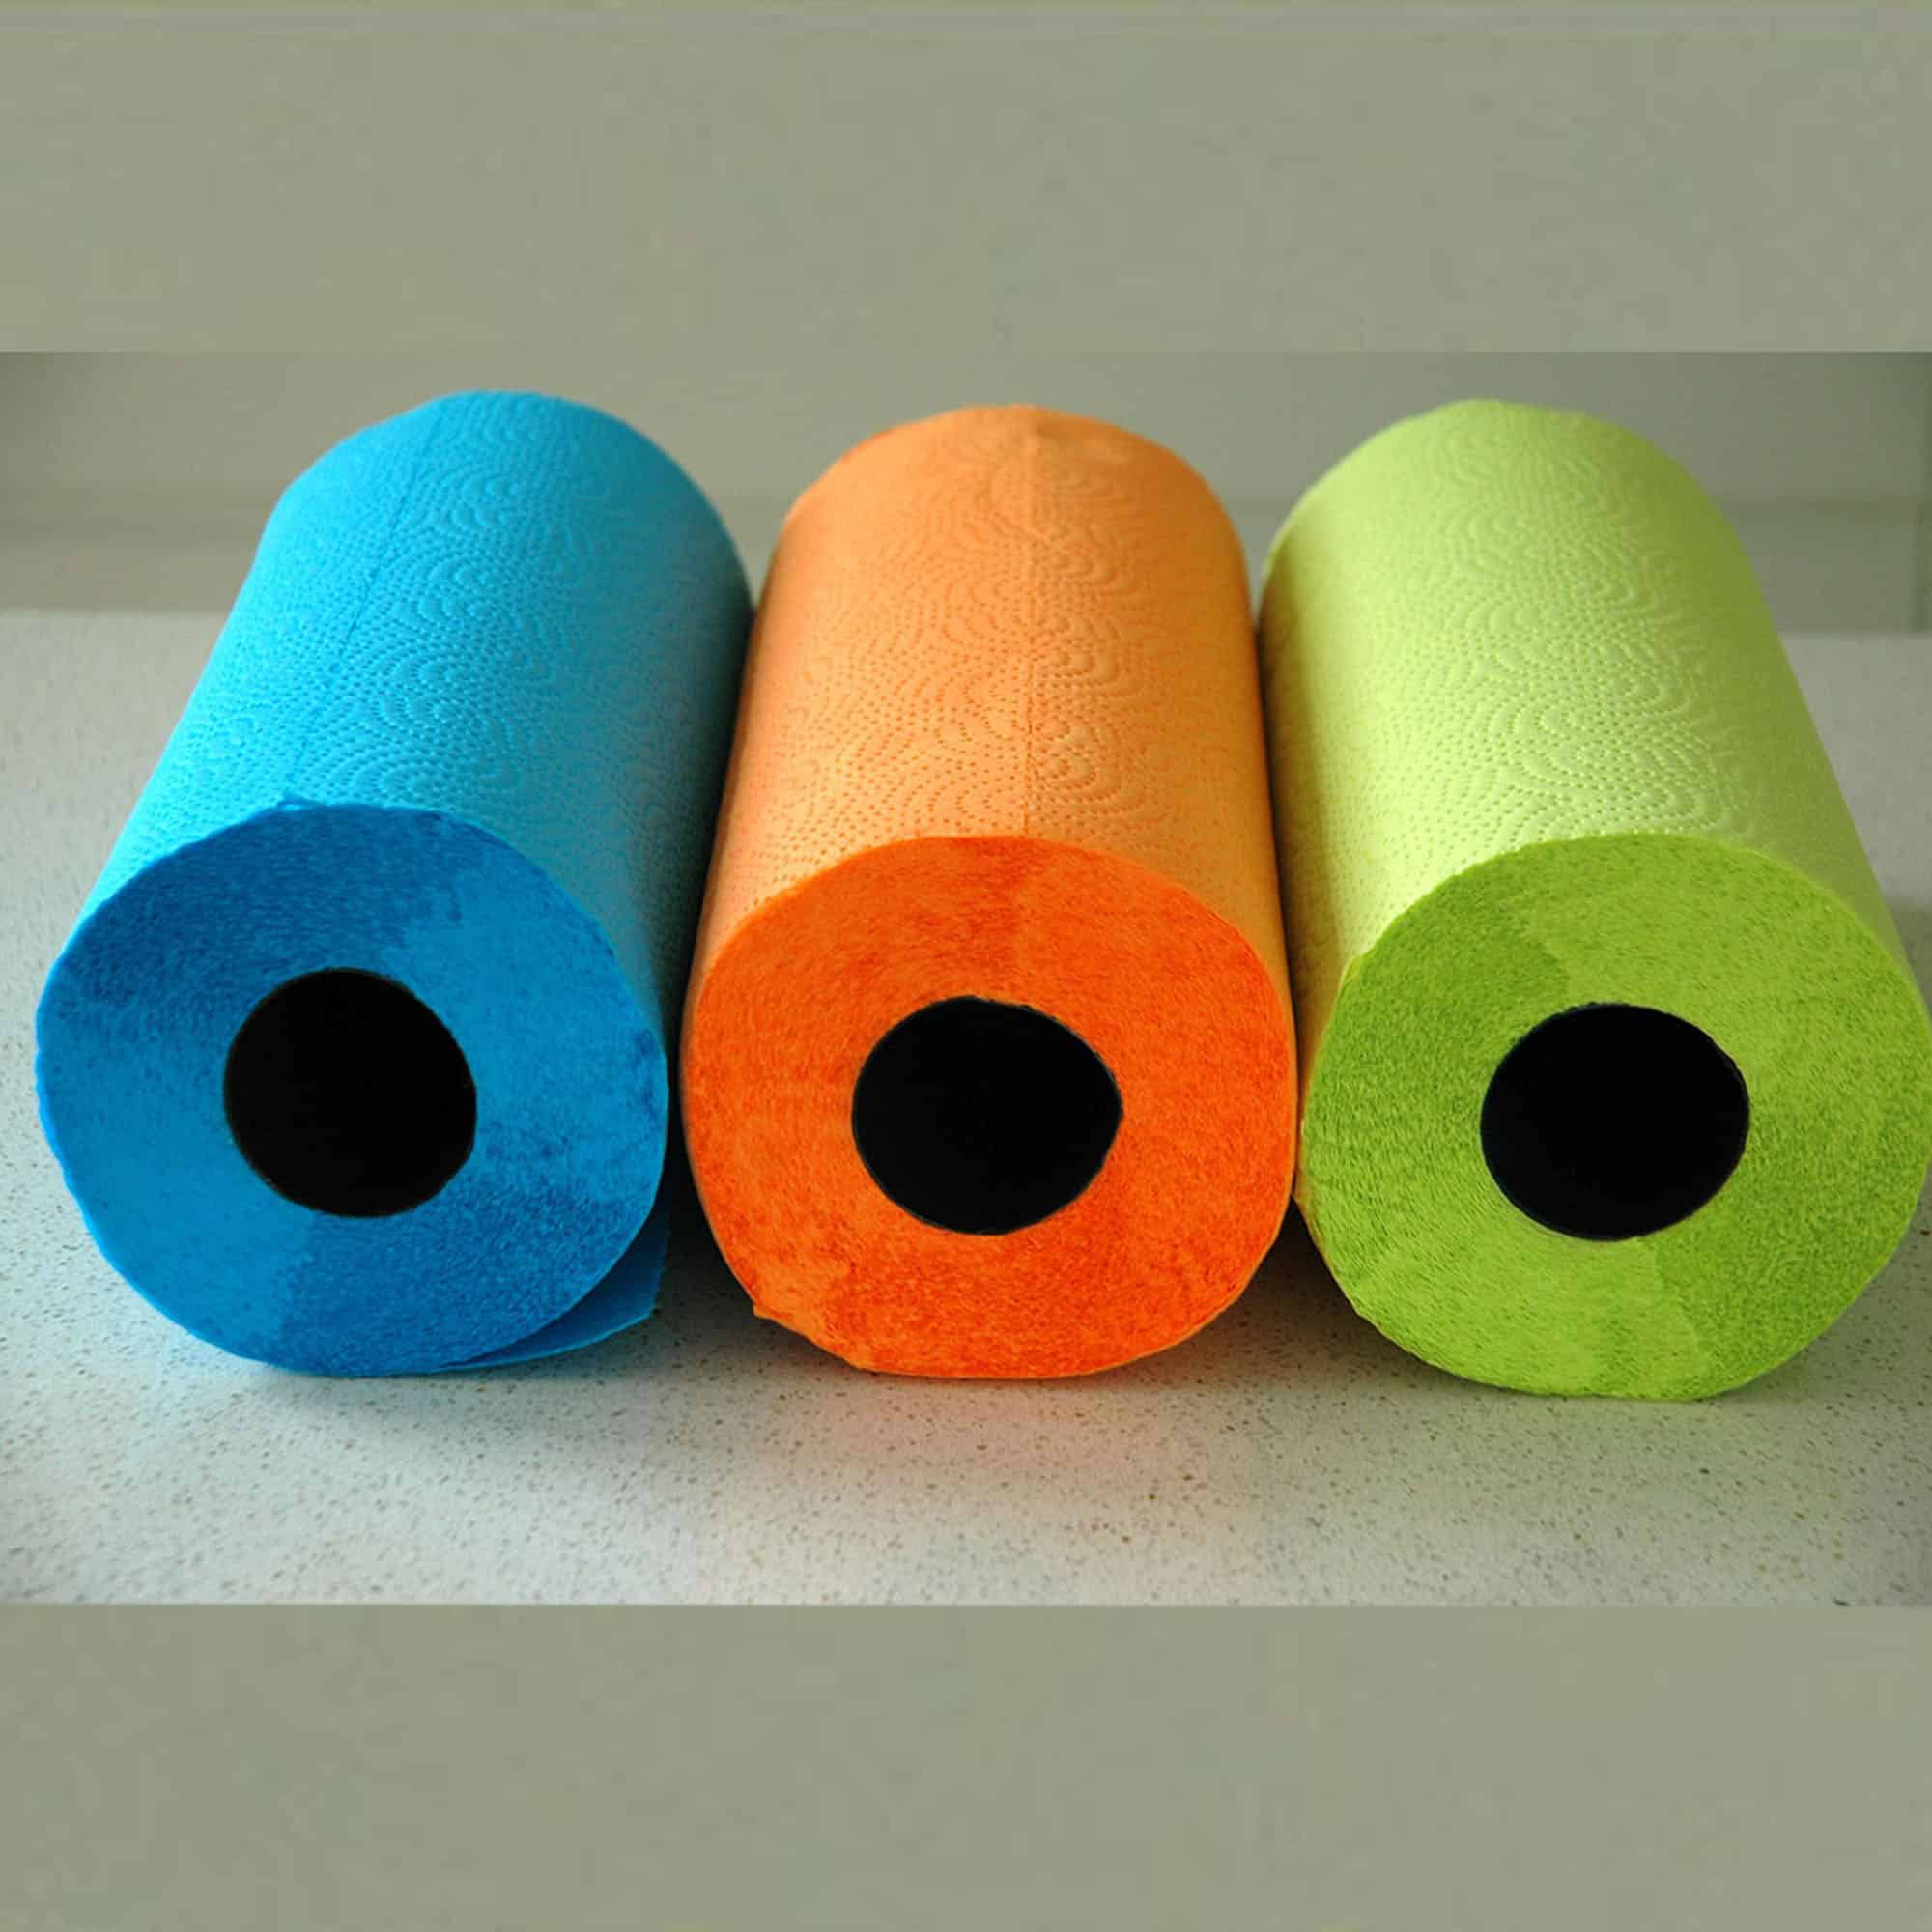 https://roll-lux.com/wp-content/uploads/2020/01/RG200085895-Blue-Paper-Towel-Jumbo-Roll-2-Ply-120-Highly-Absorbent-Sheets-6-3.jpg